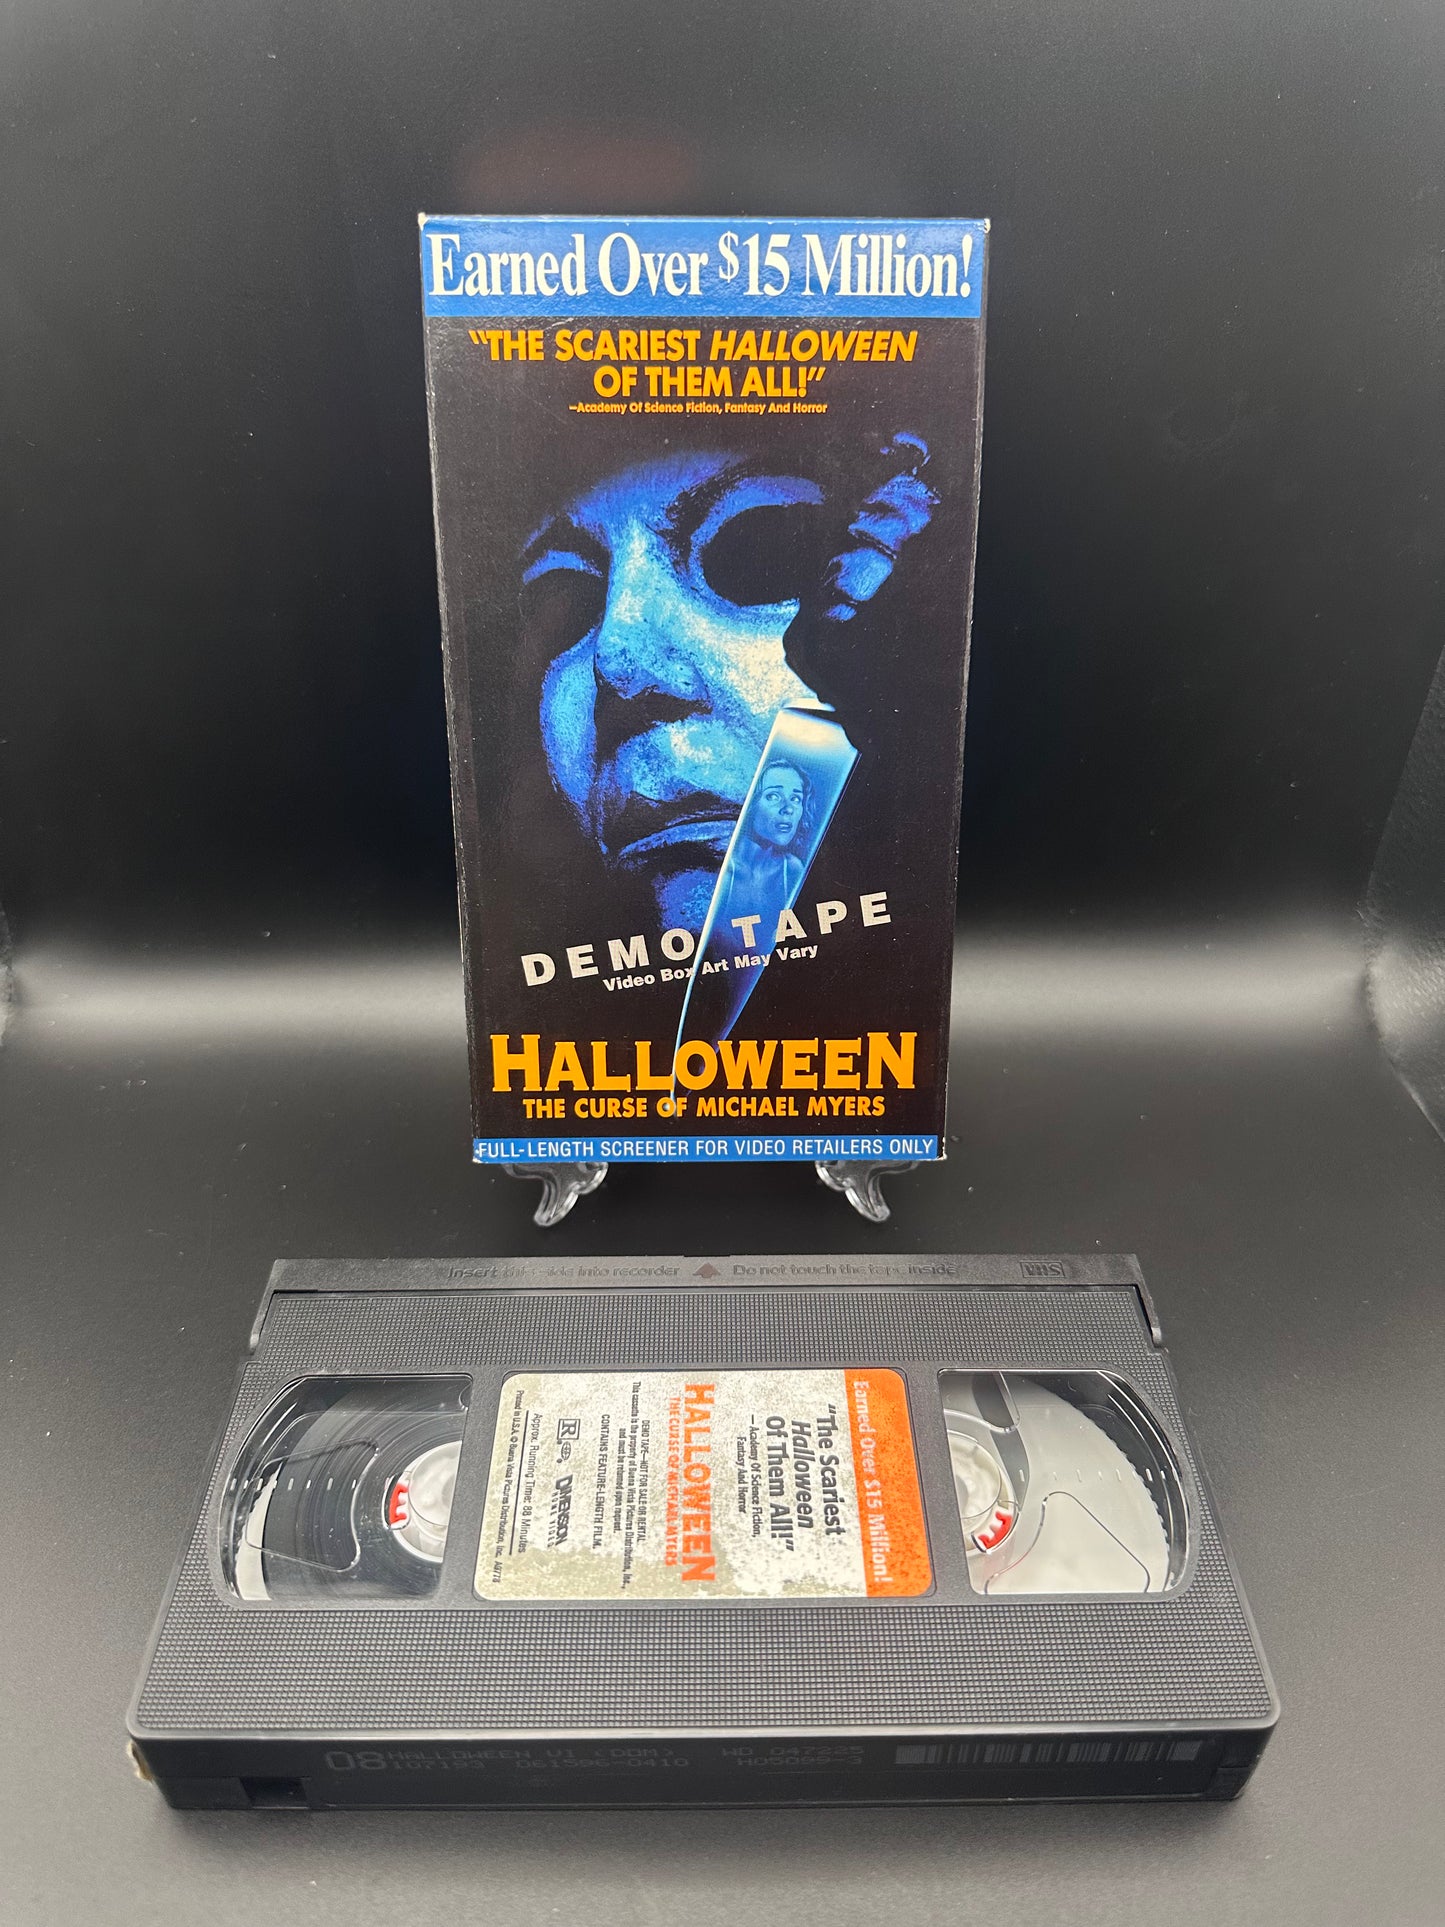 Halloween: The Curse of Michael Myers (Demo Tape)